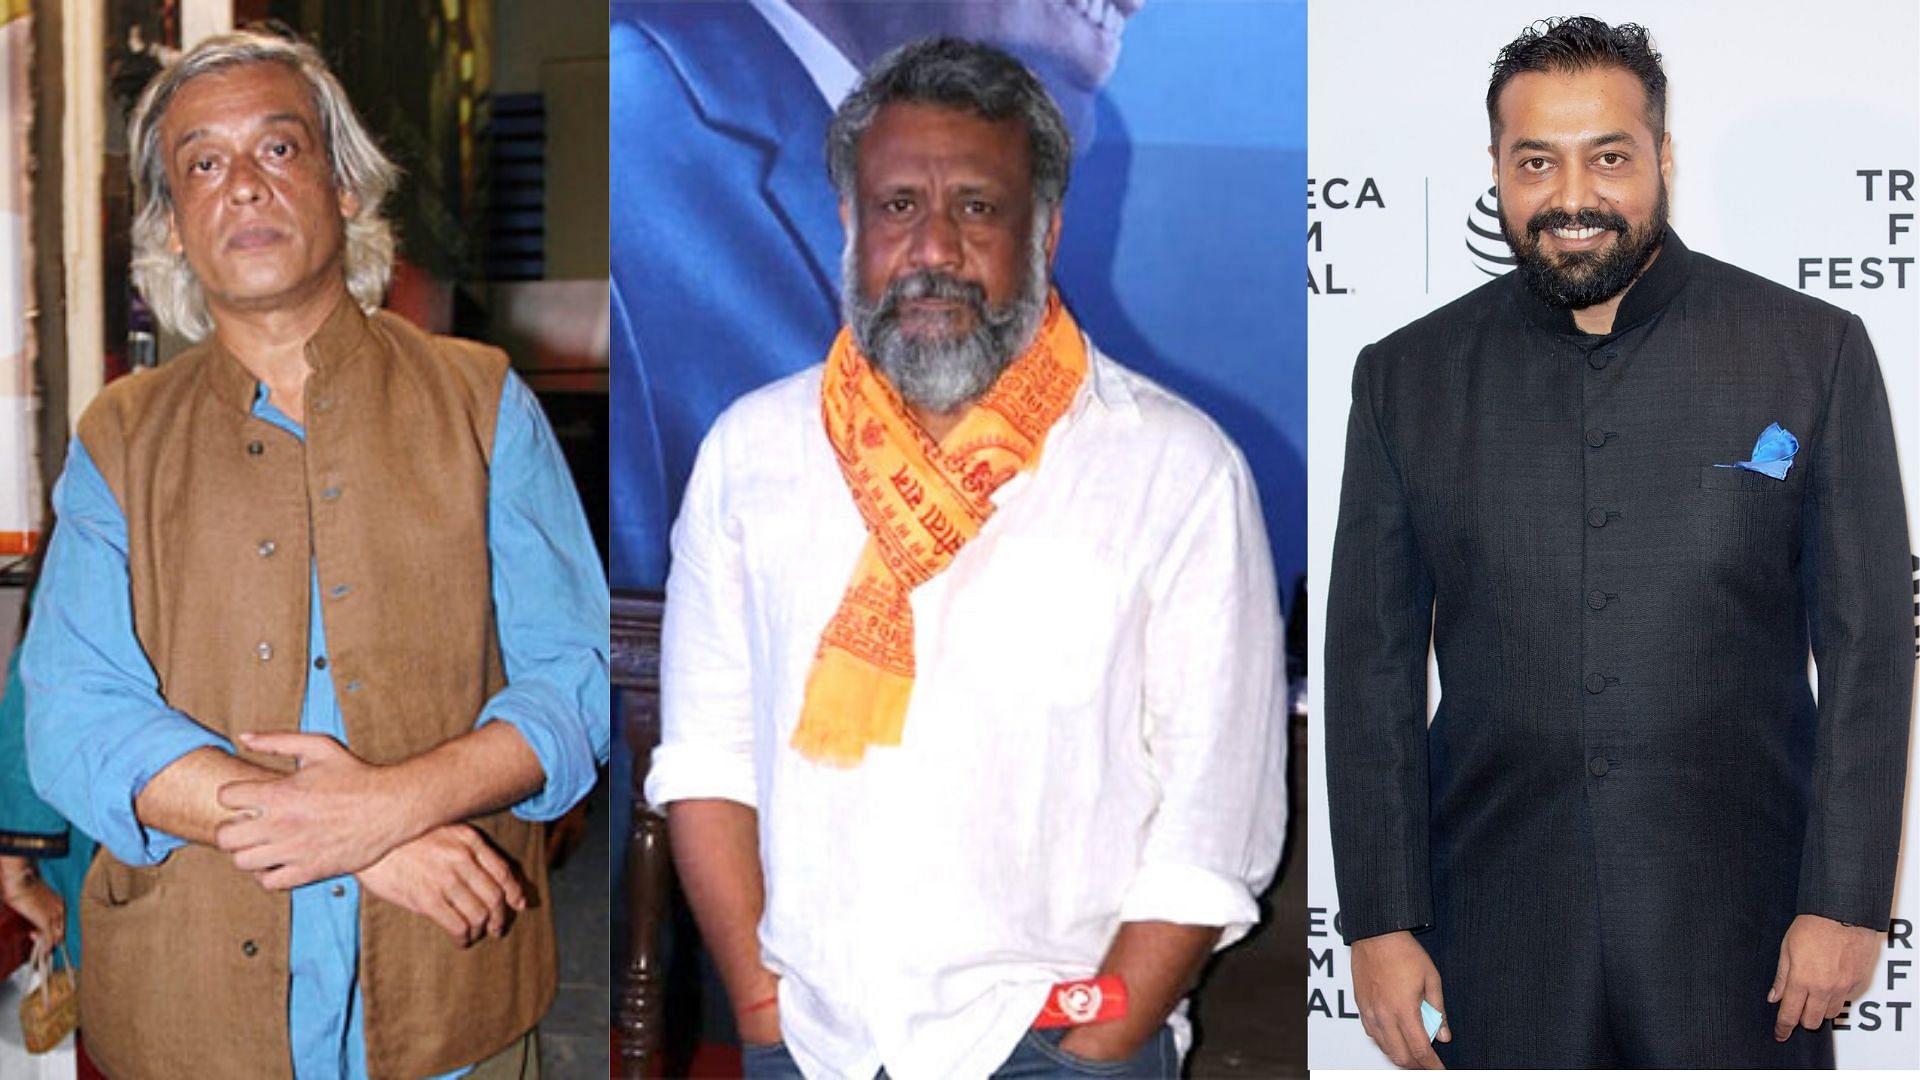 Filmmakers Sudhir Mishra, Anubhav Sinha and Anurag Kashyap propose setting up a fund to help daily wage workers in the industry.